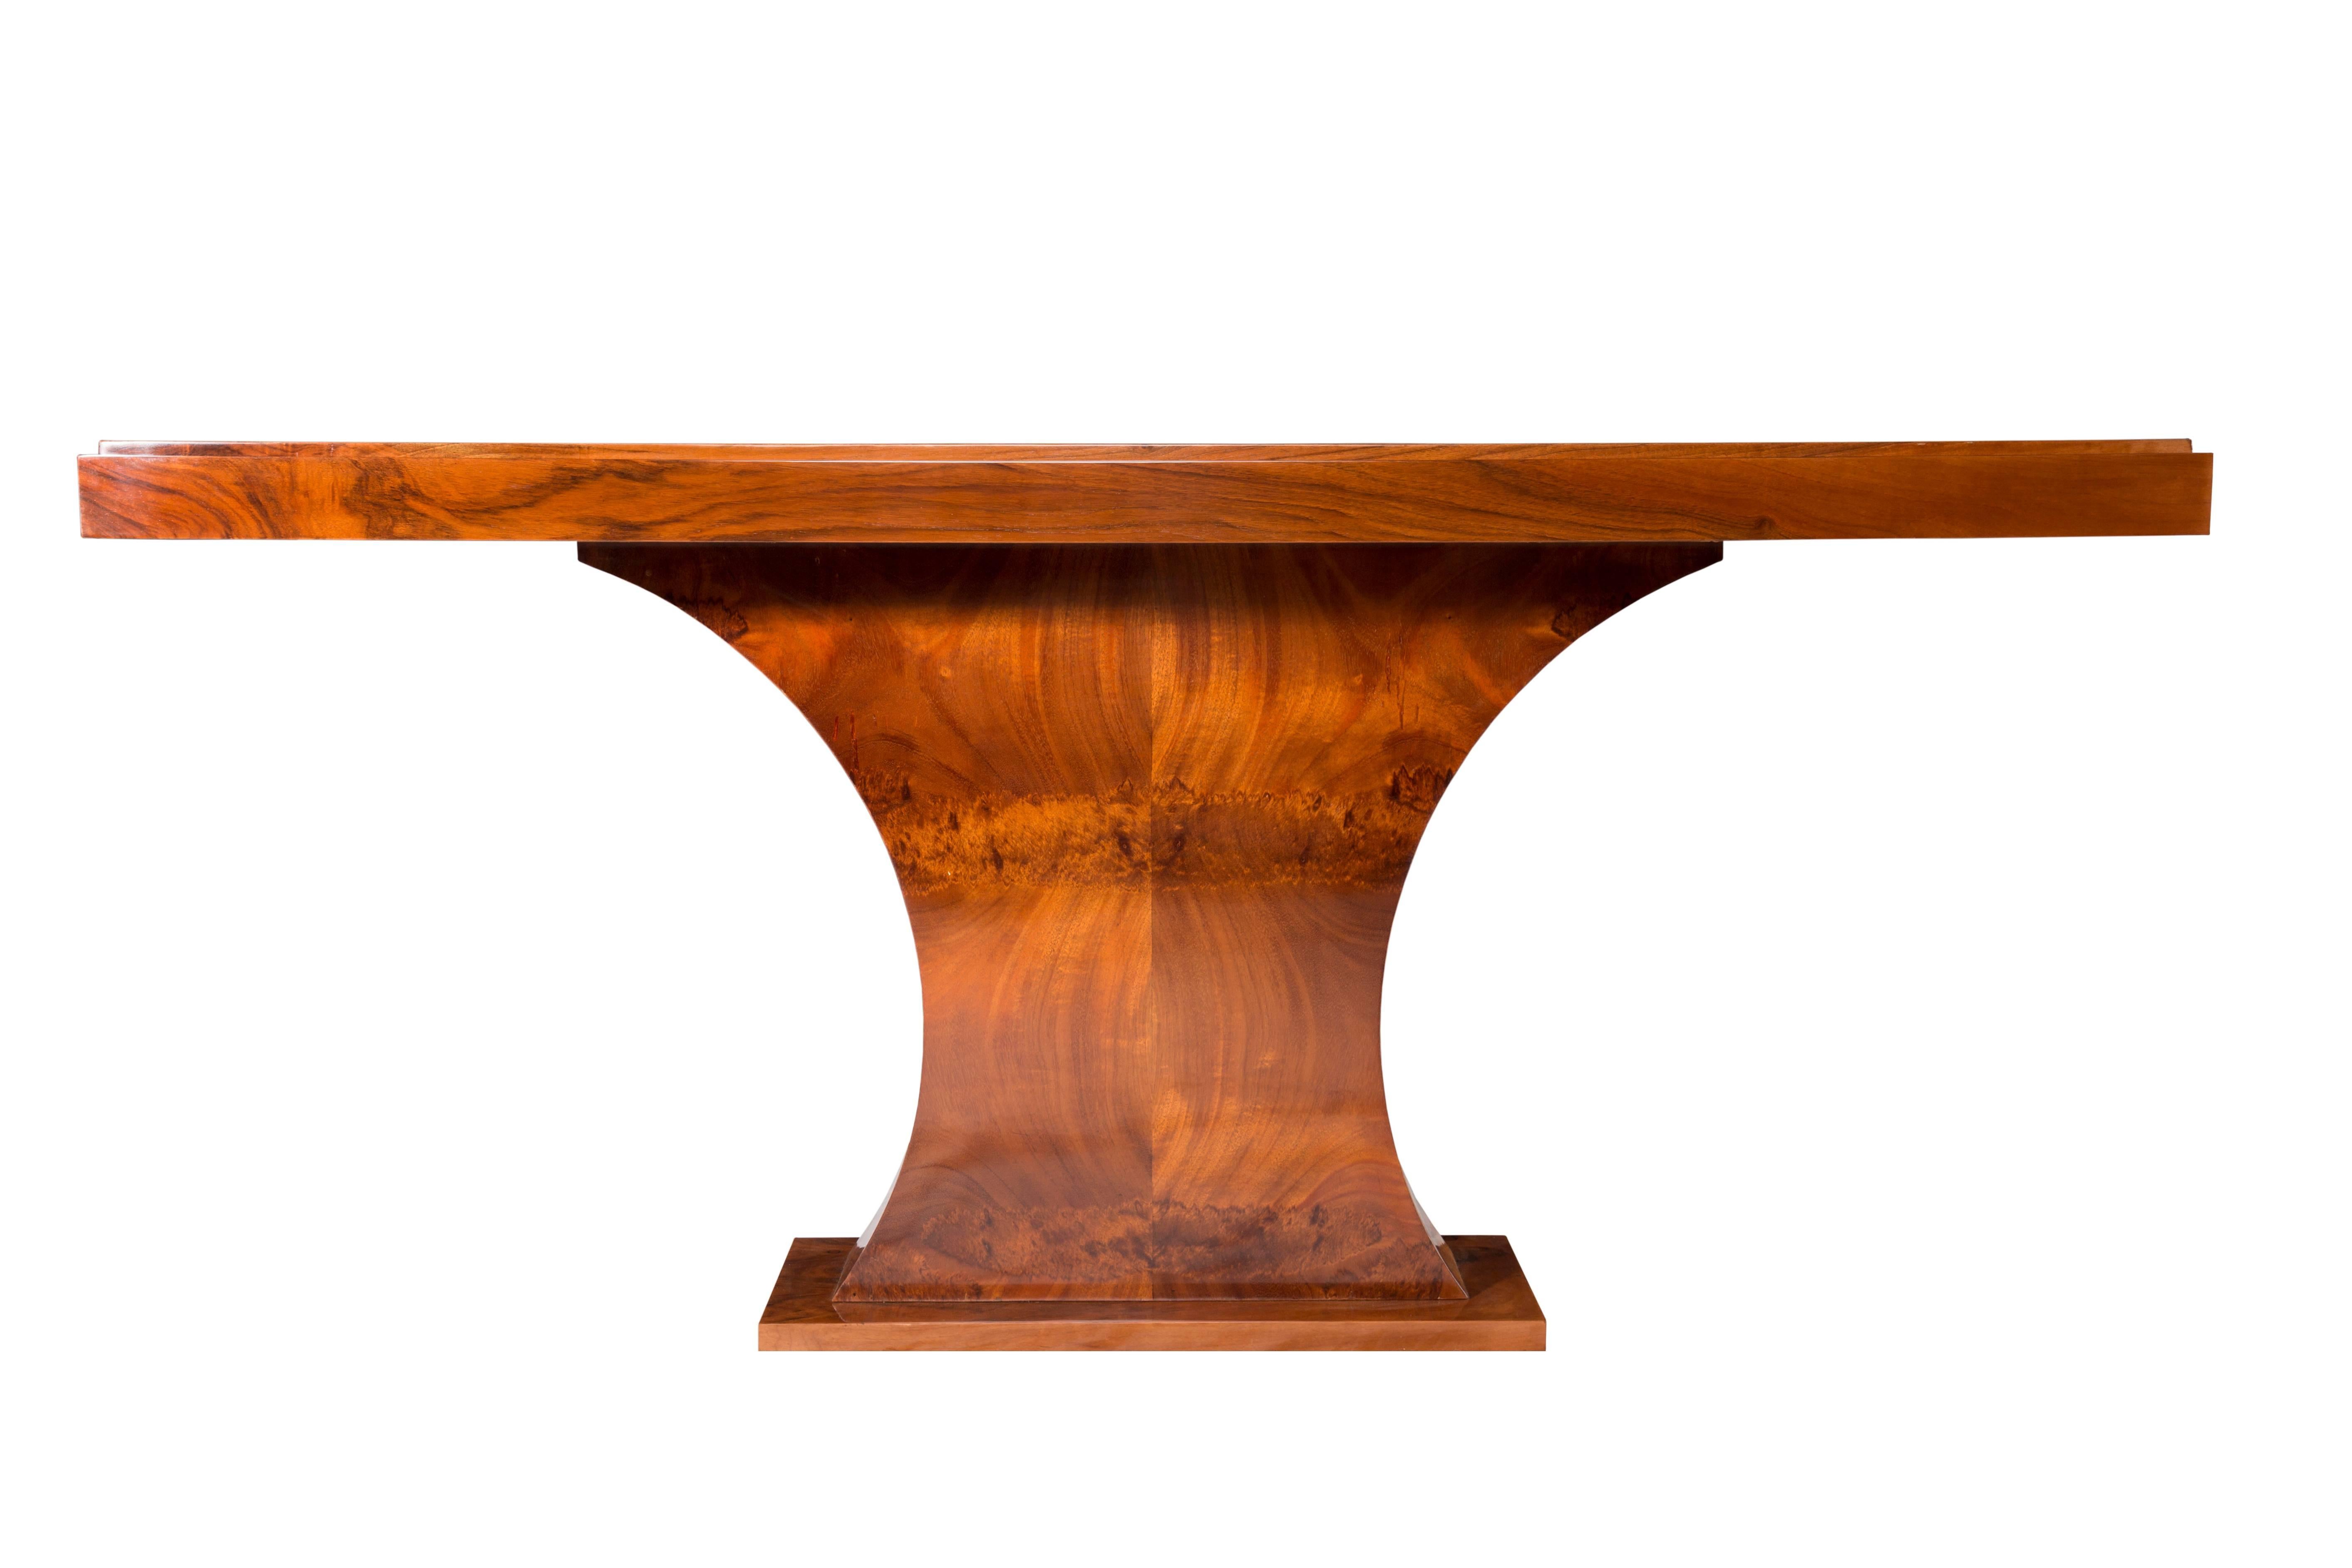 A very elegant pair of French origin Art Deco console tables.
The tables are walnut veneered and finished with a lustrous handmade French polish.
They can be placed in an entry as well as in the living room.